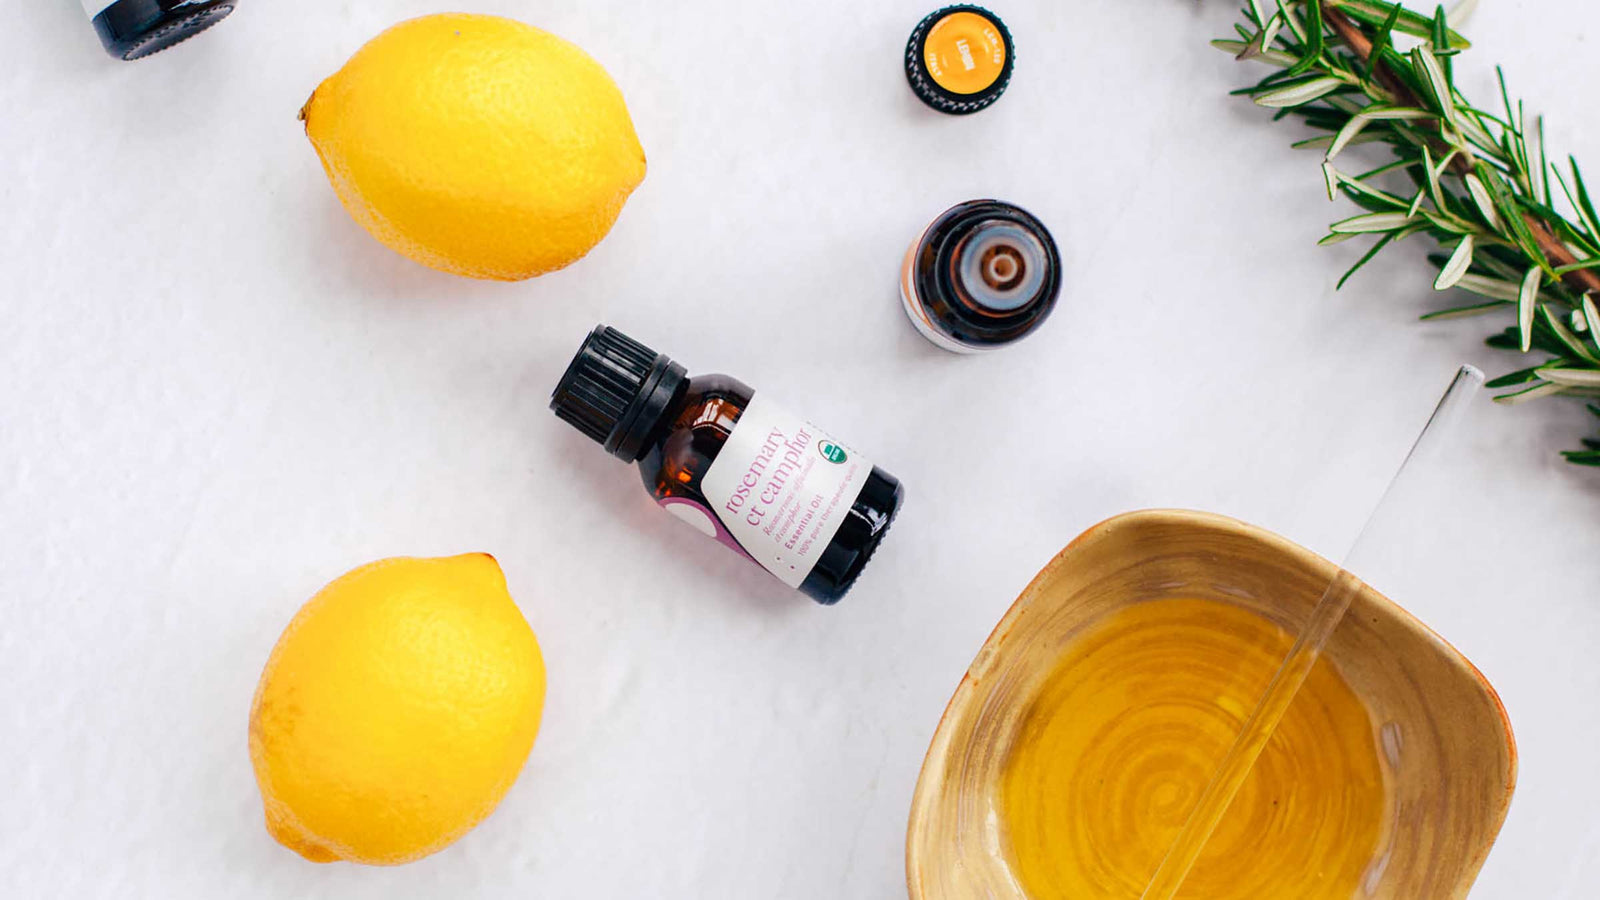 Mood-boosting oils & recipes for stress relief